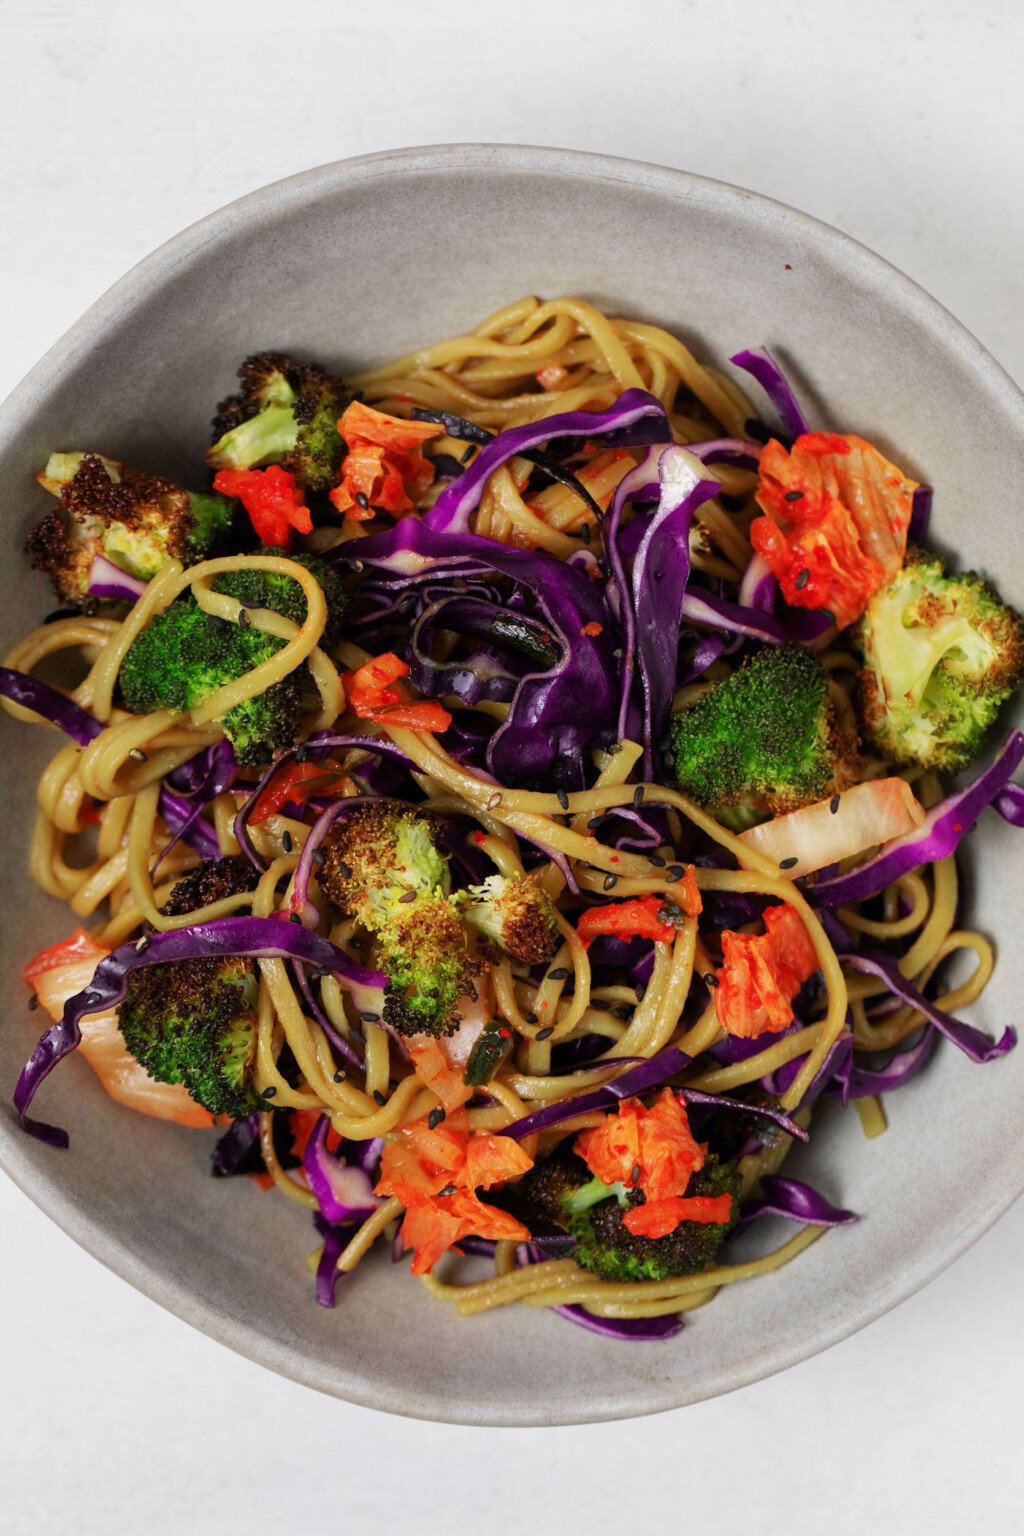 A dish of roasted broccoli kimchi noodles has been piled into a gray, ceramic bowl. The noodles also contain bright red cabbage.